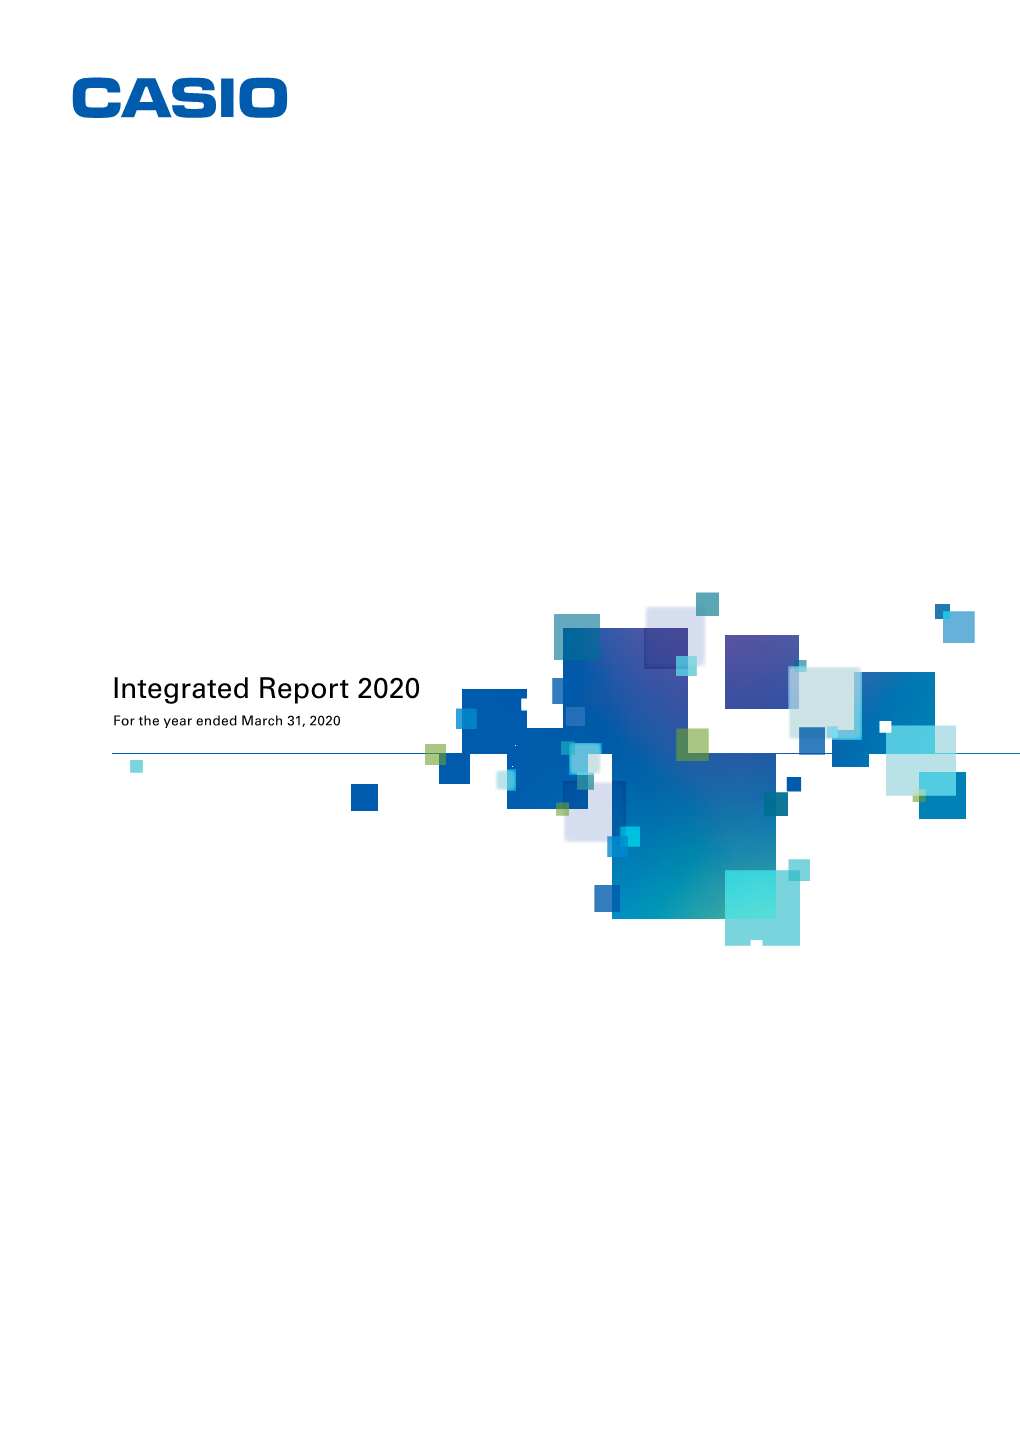 Integrated Report 2020 for the Year Ended March 31, 2020 Table of Contents